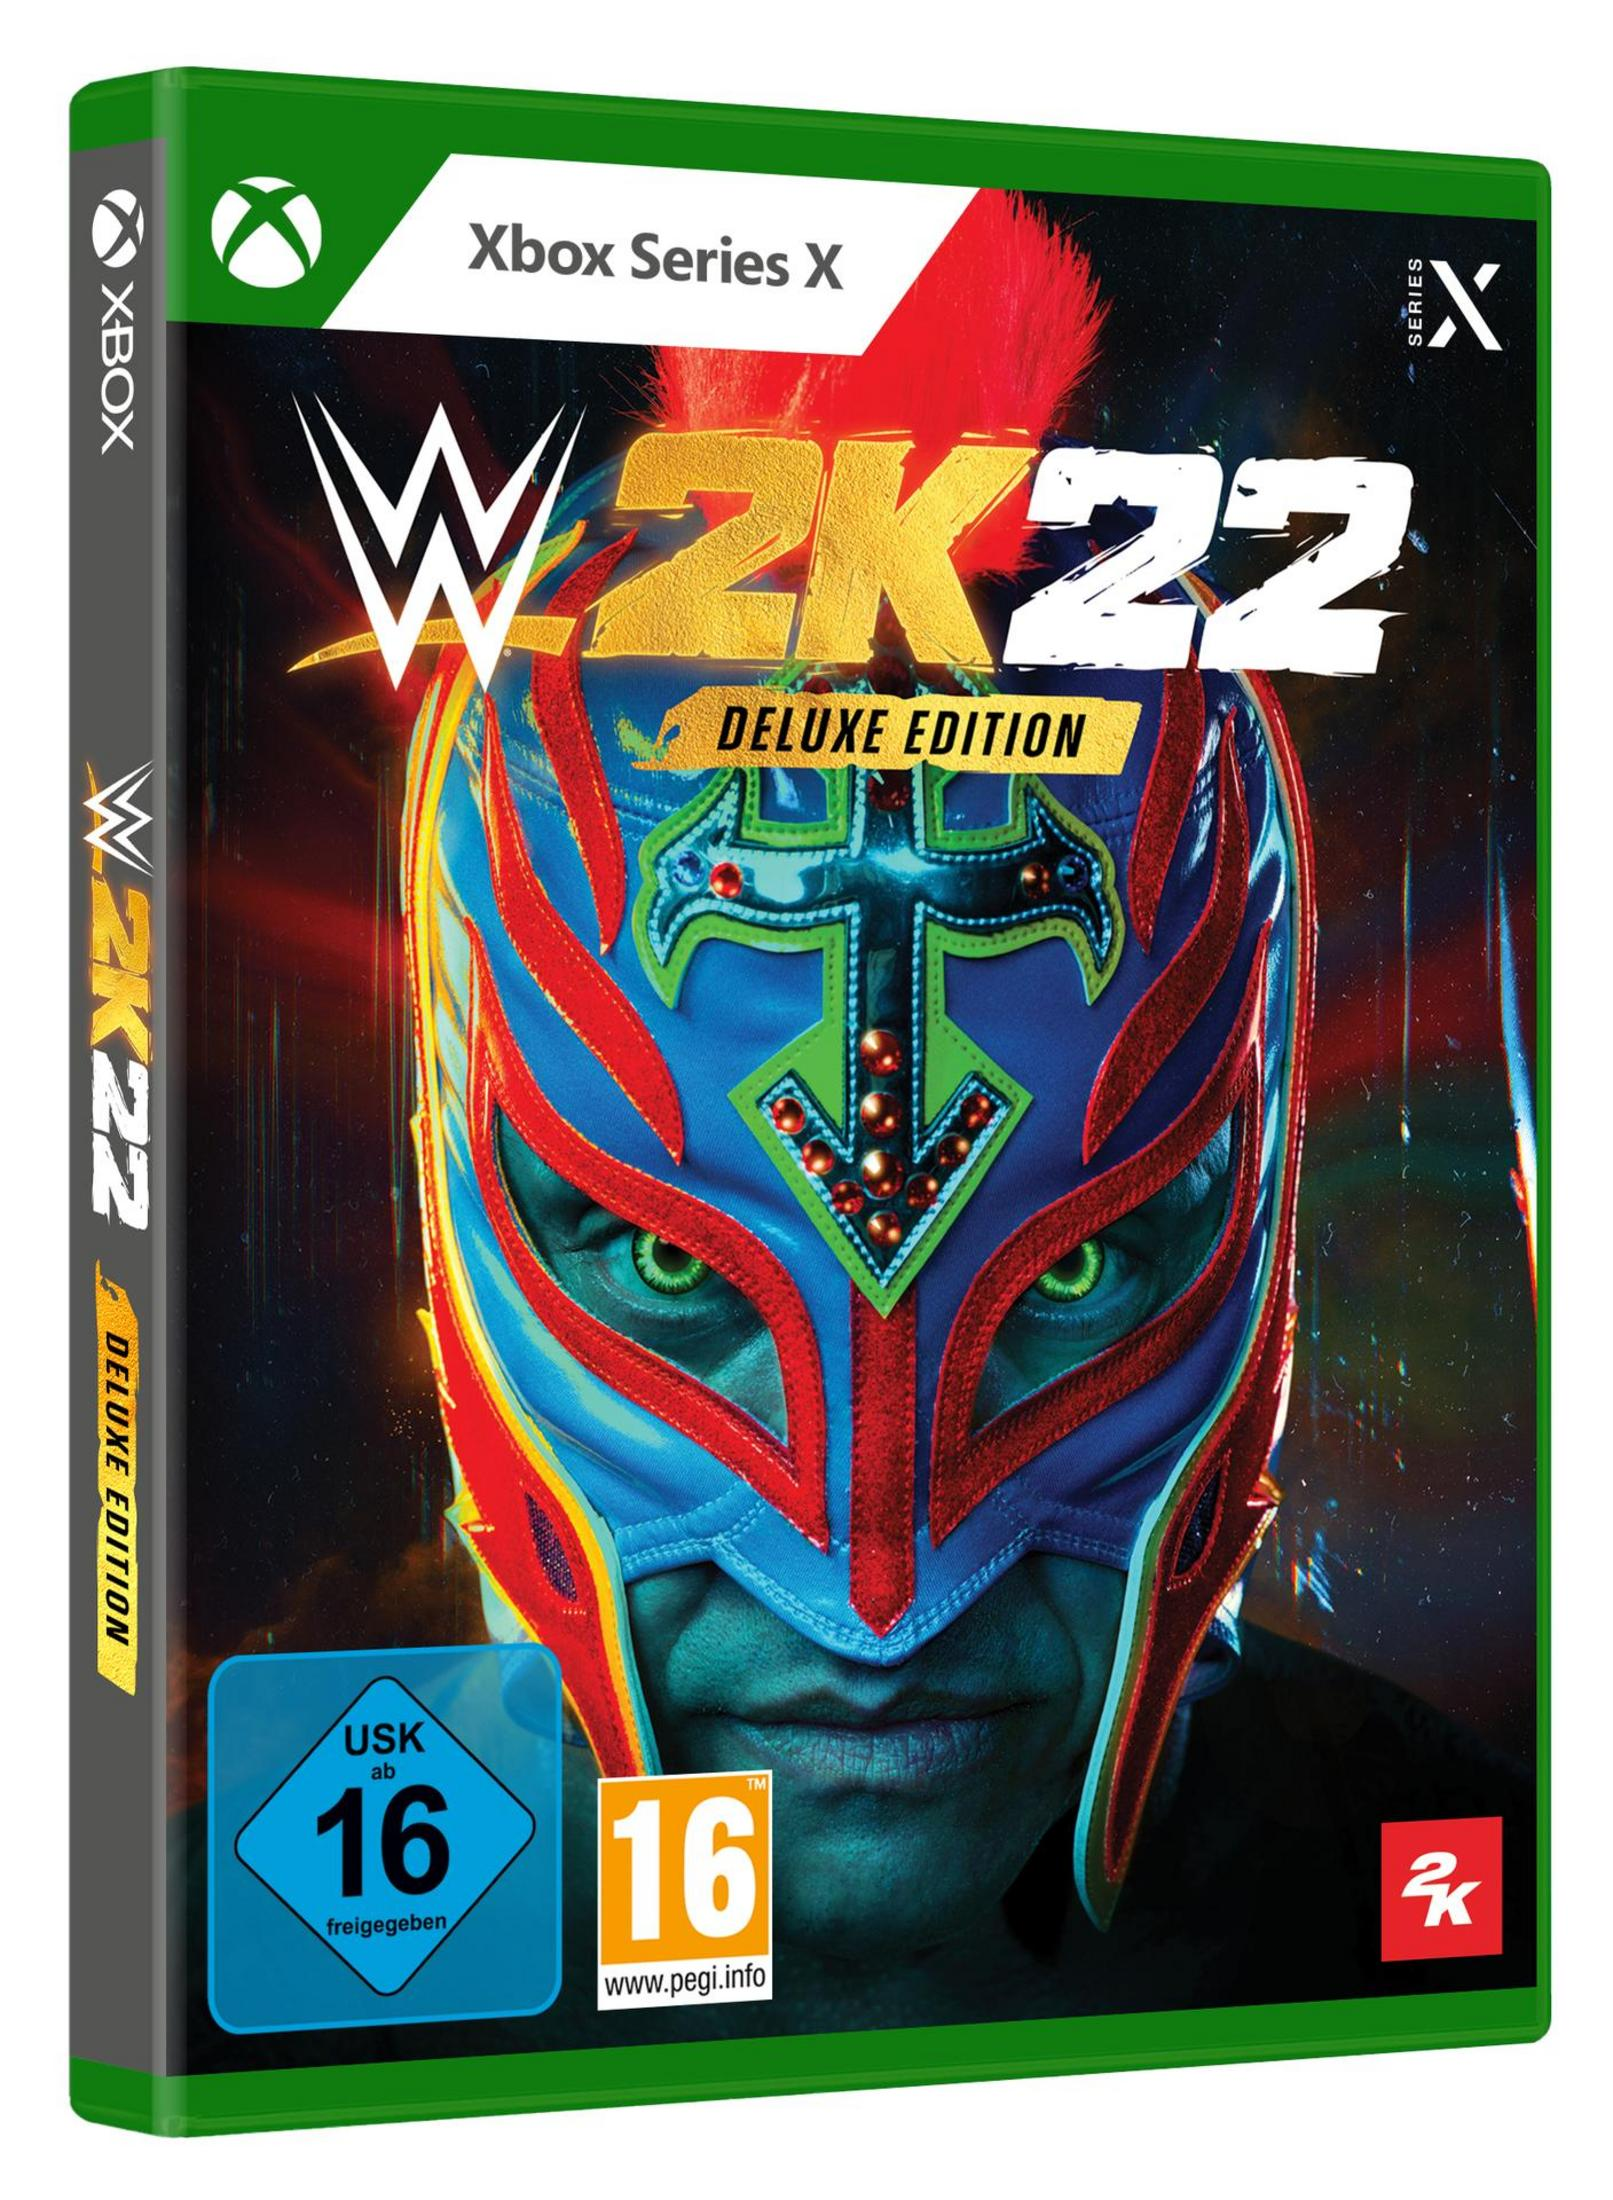 Edition - X|S] Deluxe [Xbox Series WWE - 2K22